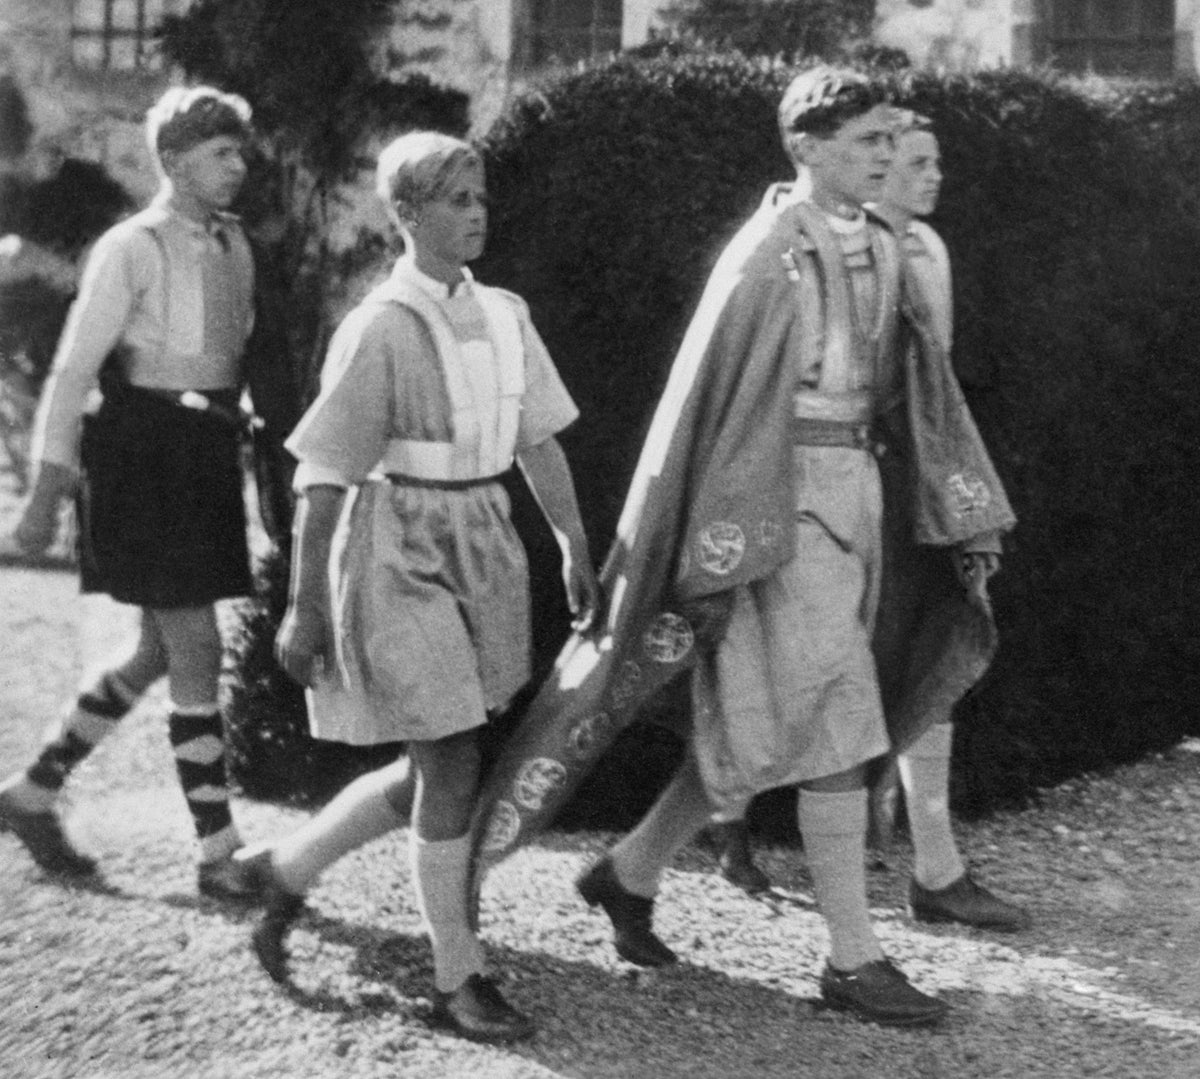 A twelve year old Prince Philip of Greece (2nd from left) takes part in an historical pageant at Gordonstoun School, Moray, Scotland